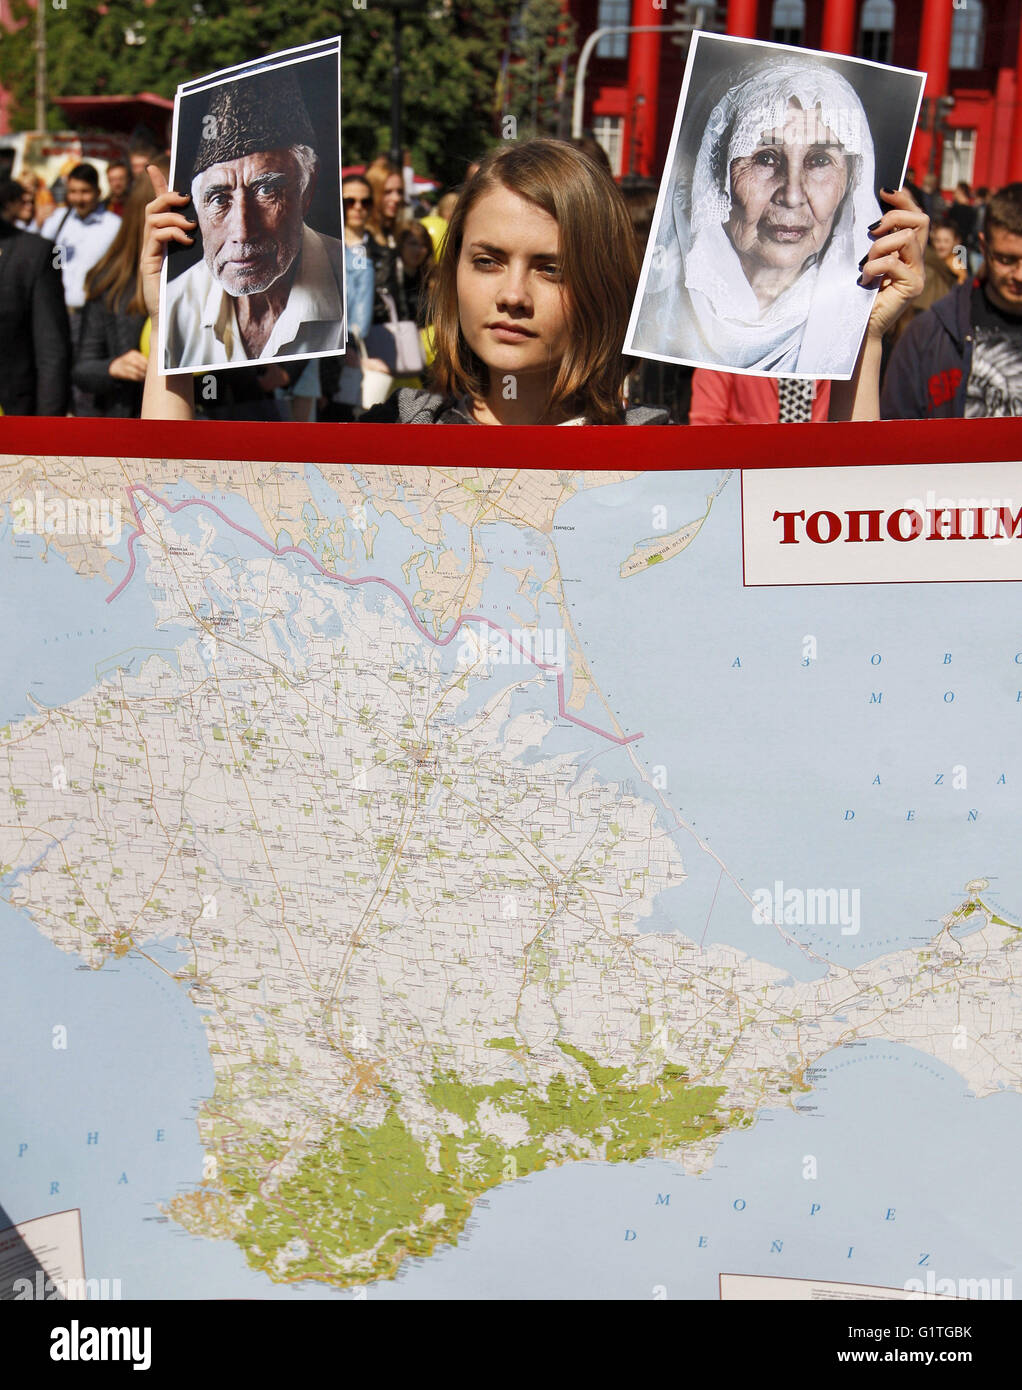 Kiev, Ukraine. 18th May, 2016. An Ukrainian student stands in front the Crimea map and holds portraits of Crimean Tatars during a rally dedicated to 72nd anniversary of Crimean Tatars deportation from the Crimea in 1944 by Soviet dictator Joseph Stalin, in Kiev, Ukraine, 18 May 2016. © Serg Glovny/ZUMA Wire/Alamy Live News Stock Photo